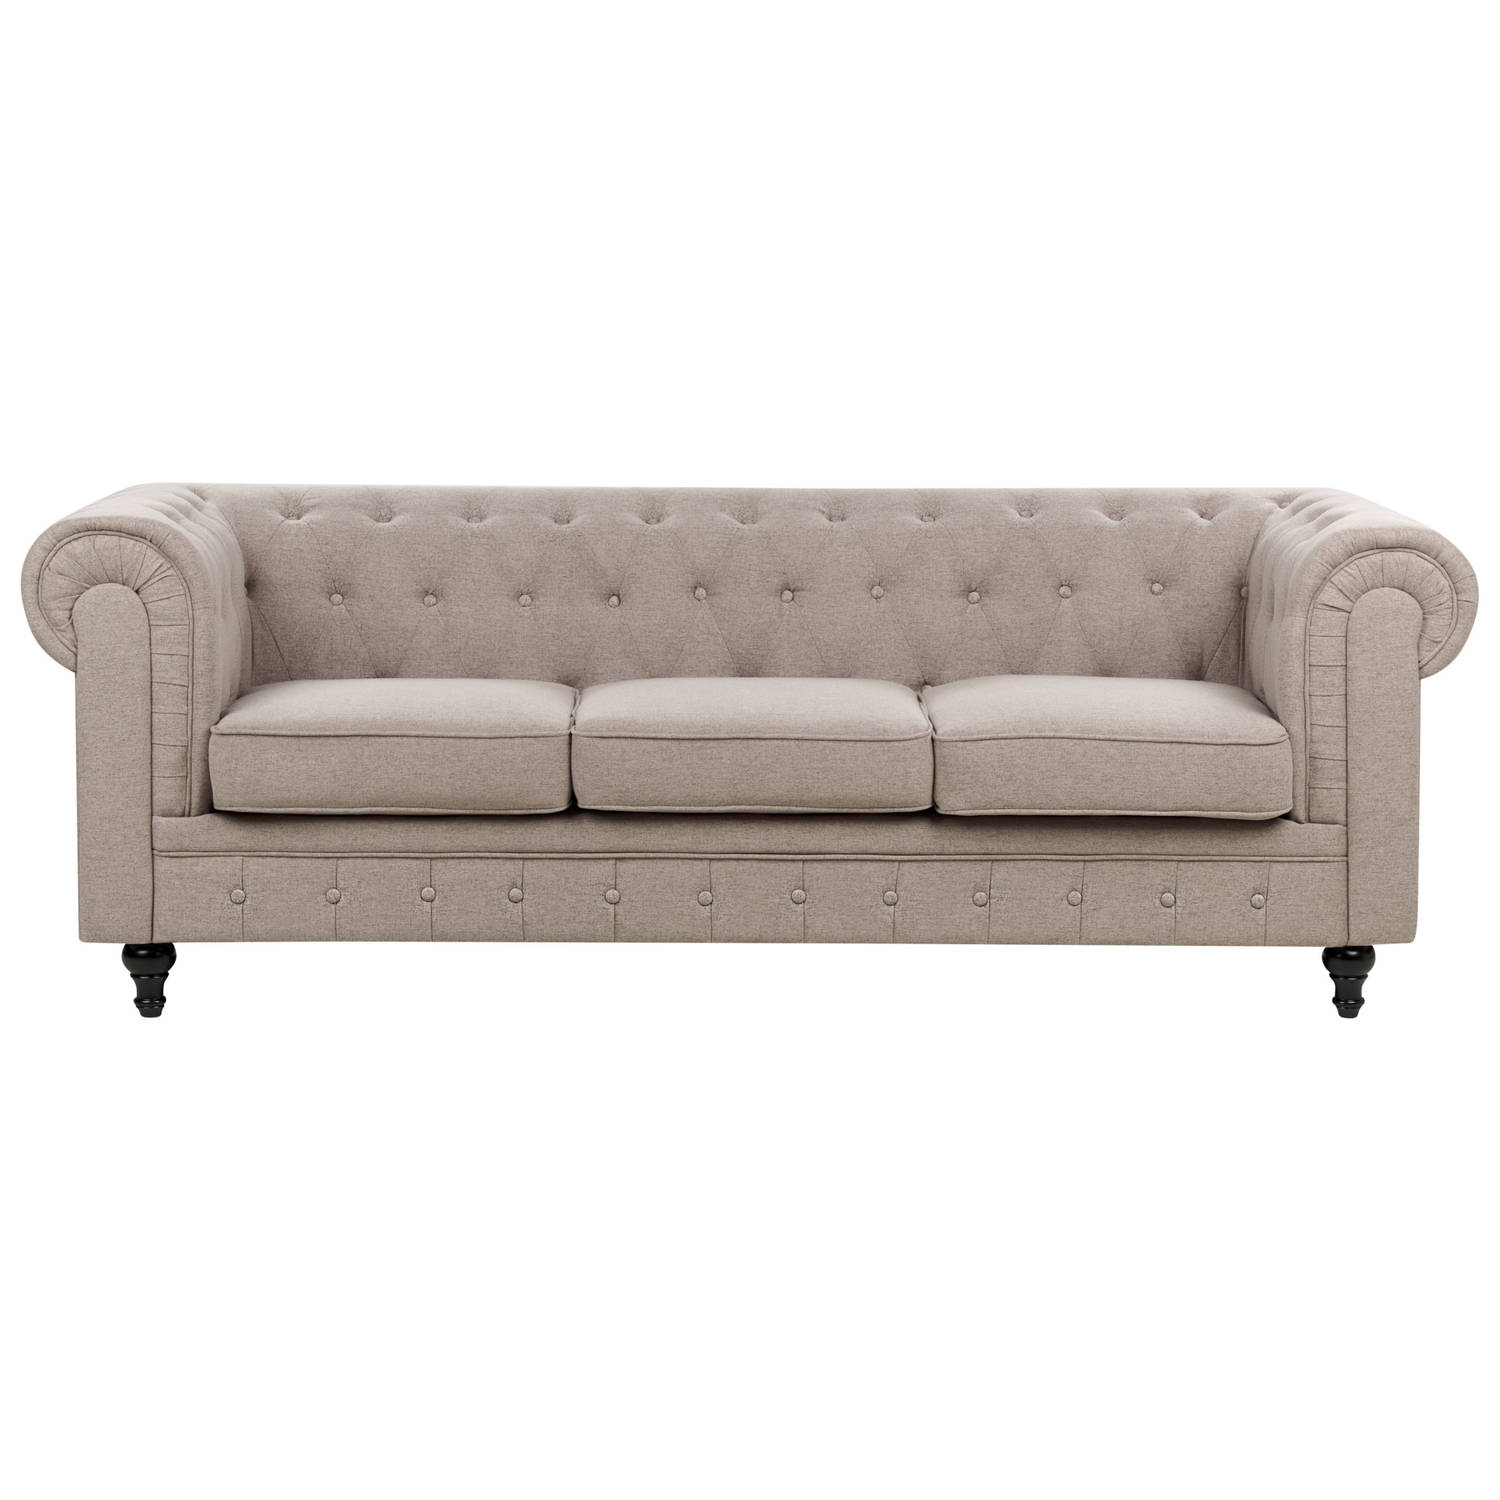 CHESTERFIELD - Chesterfield driezitsbank - Taupe - Polyester